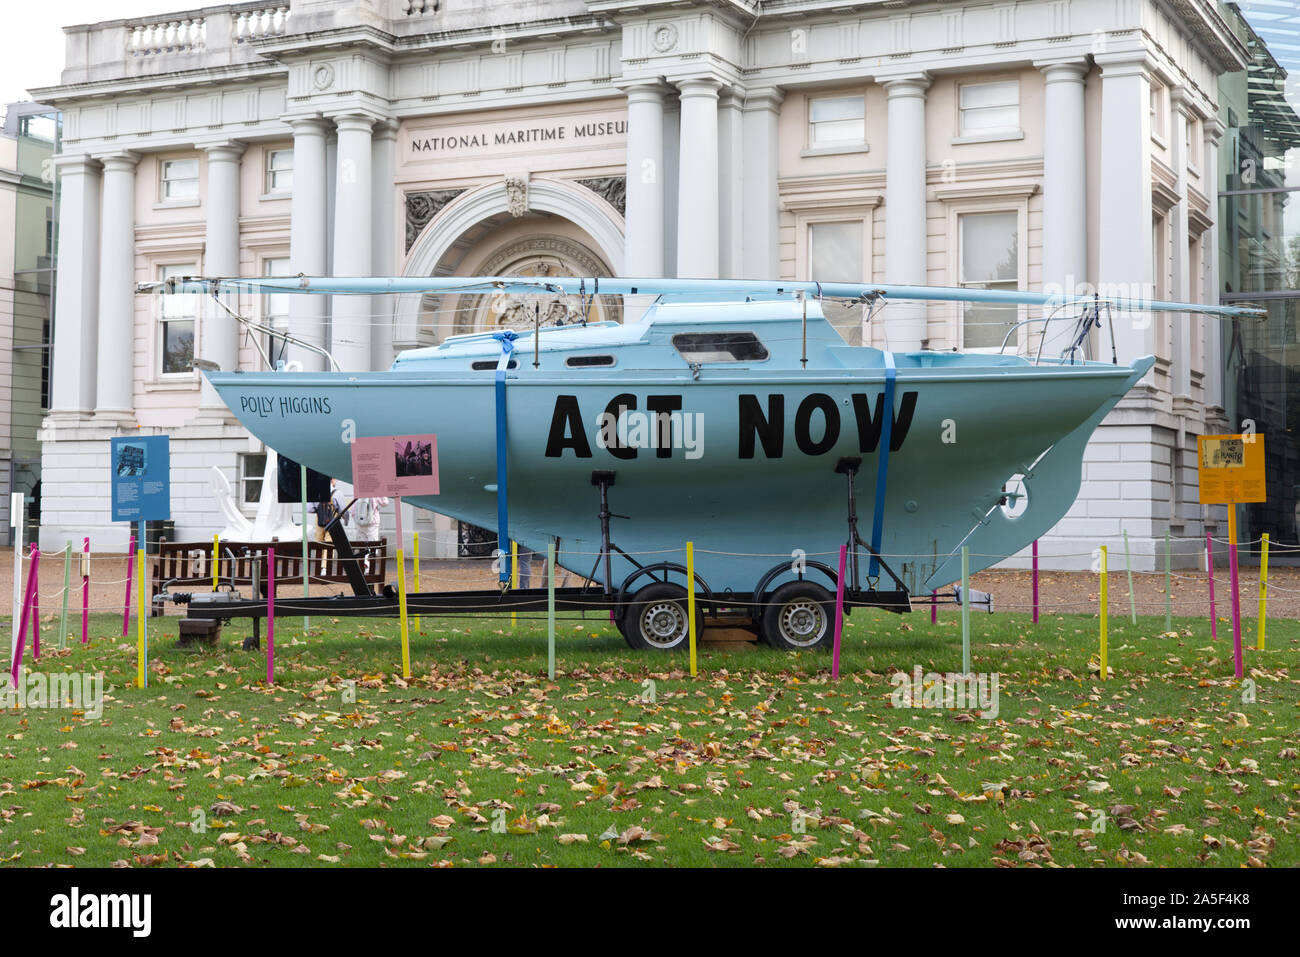 The Polly Higgins Extinction Rebellion boat on display at the National Maritime Museum Stock Photo